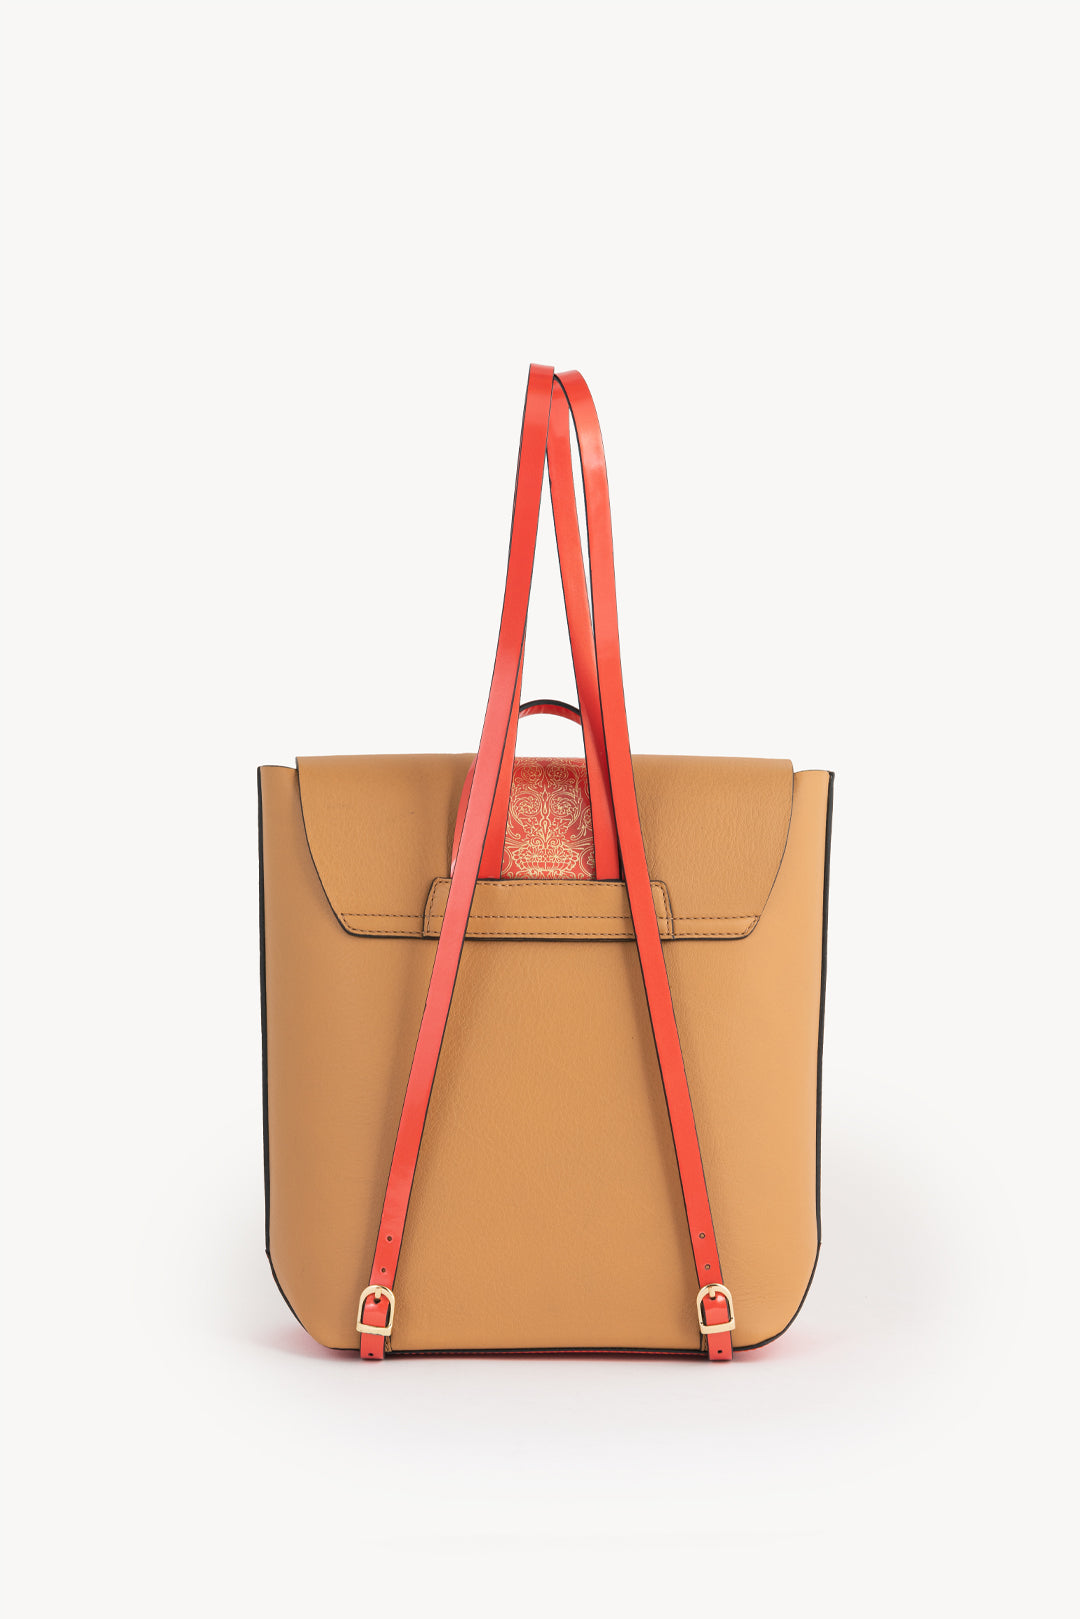 Backpack in leather with flap - Beige and Orange